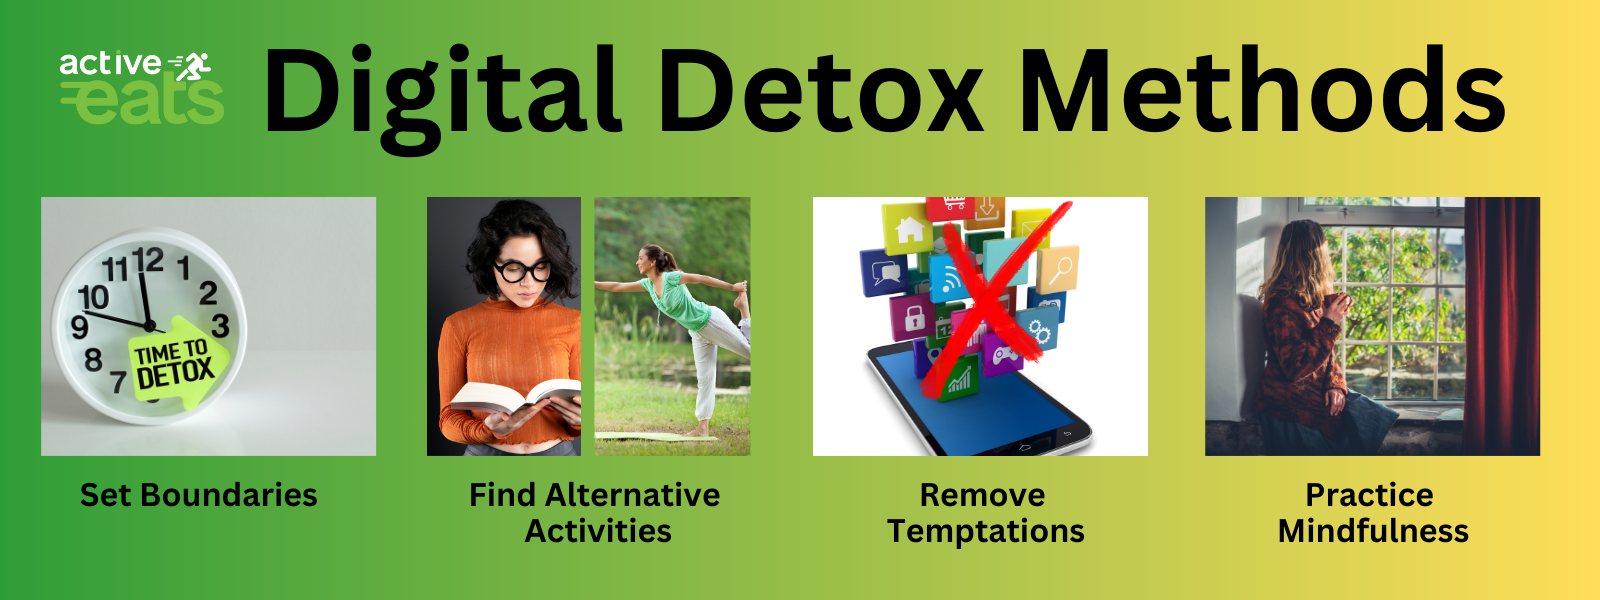 Image: A visual representation of the top 8 digital detox methods. The image features text and icons representing the methods, including setting screen time limits, practicing mindfulness, disconnecting from devices, engaging in outdoor activities, pursuing hobbies, limiting social media, having tech-free meals, and getting quality sleep. This image serves as a quick reference for strategies to disconnect from the digital world for improved well-being."